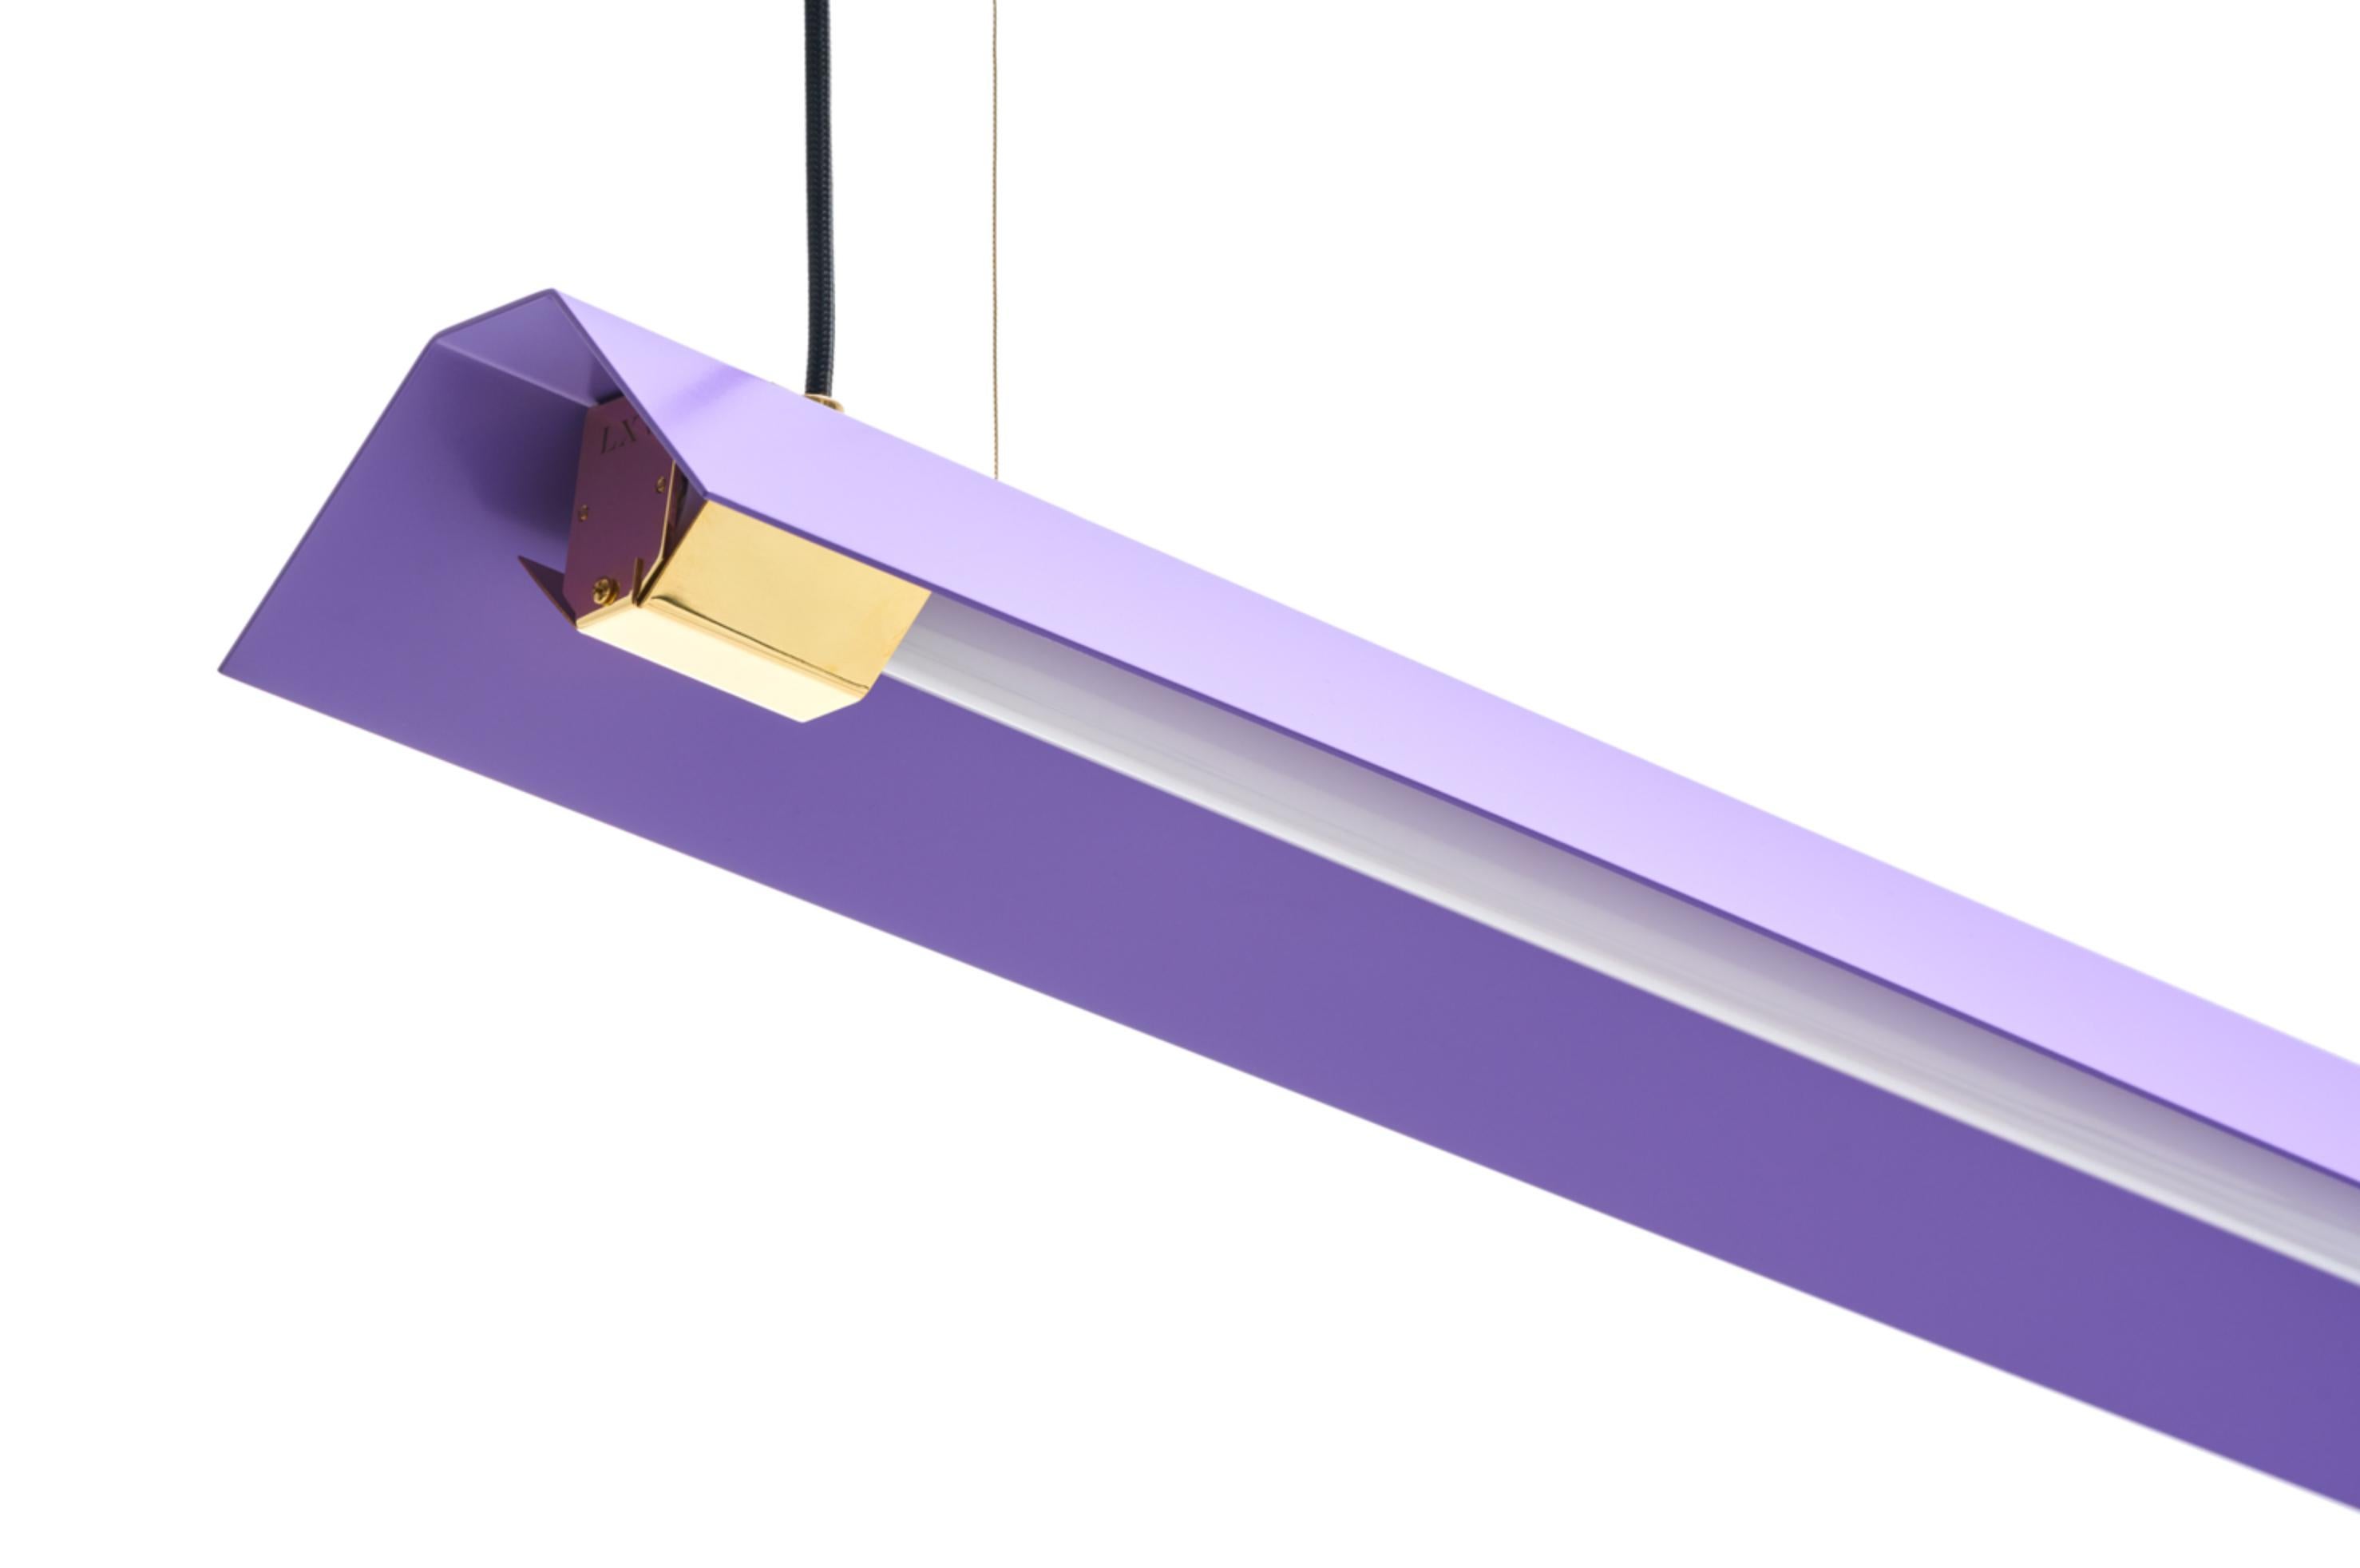 Extra large Misalliance ex lavender suspended light by Lexavala
Dimensions: D 16 x W 160 x H 8 cm
Materials: powder coated shade with details made of brass or stainless steel.

There are two lenghts of socket covers, extending over the LED. Two